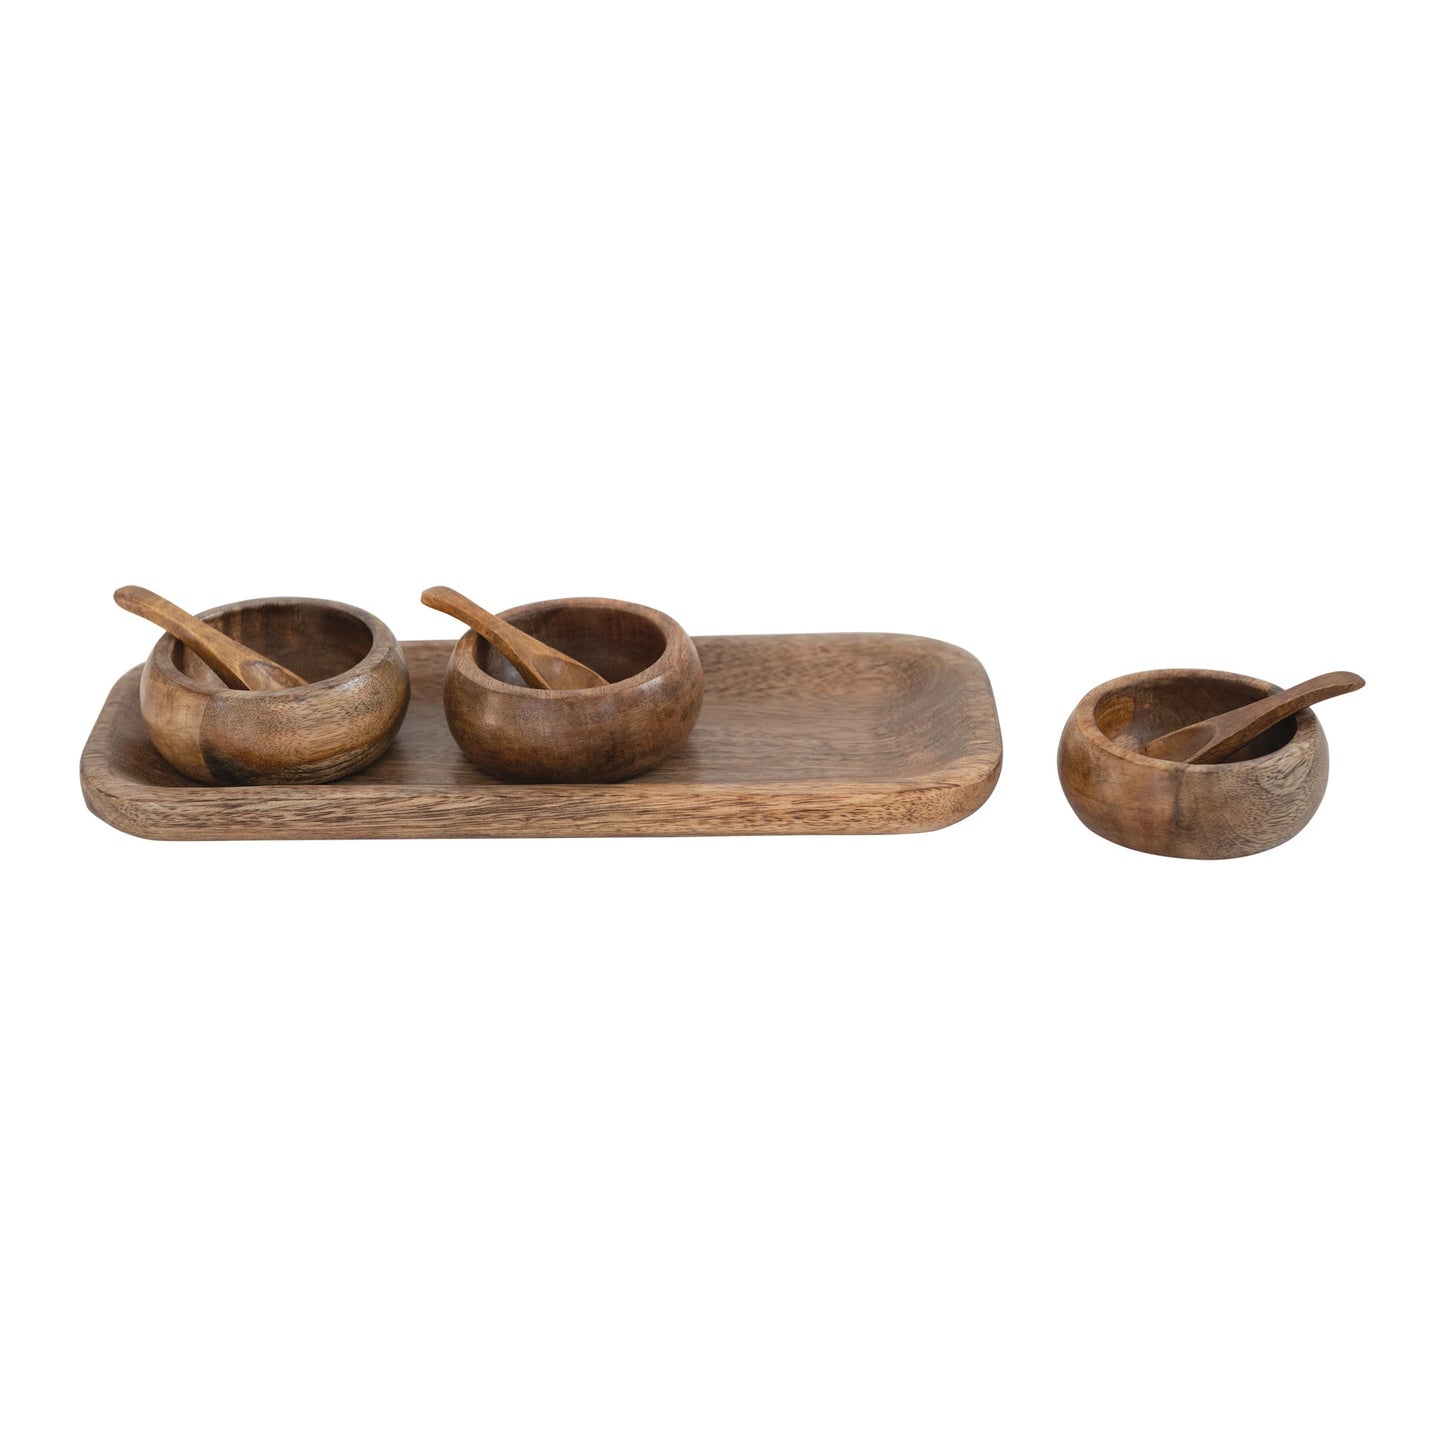 Load image into Gallery viewer, Wood Tray with Bowls and Spoons
